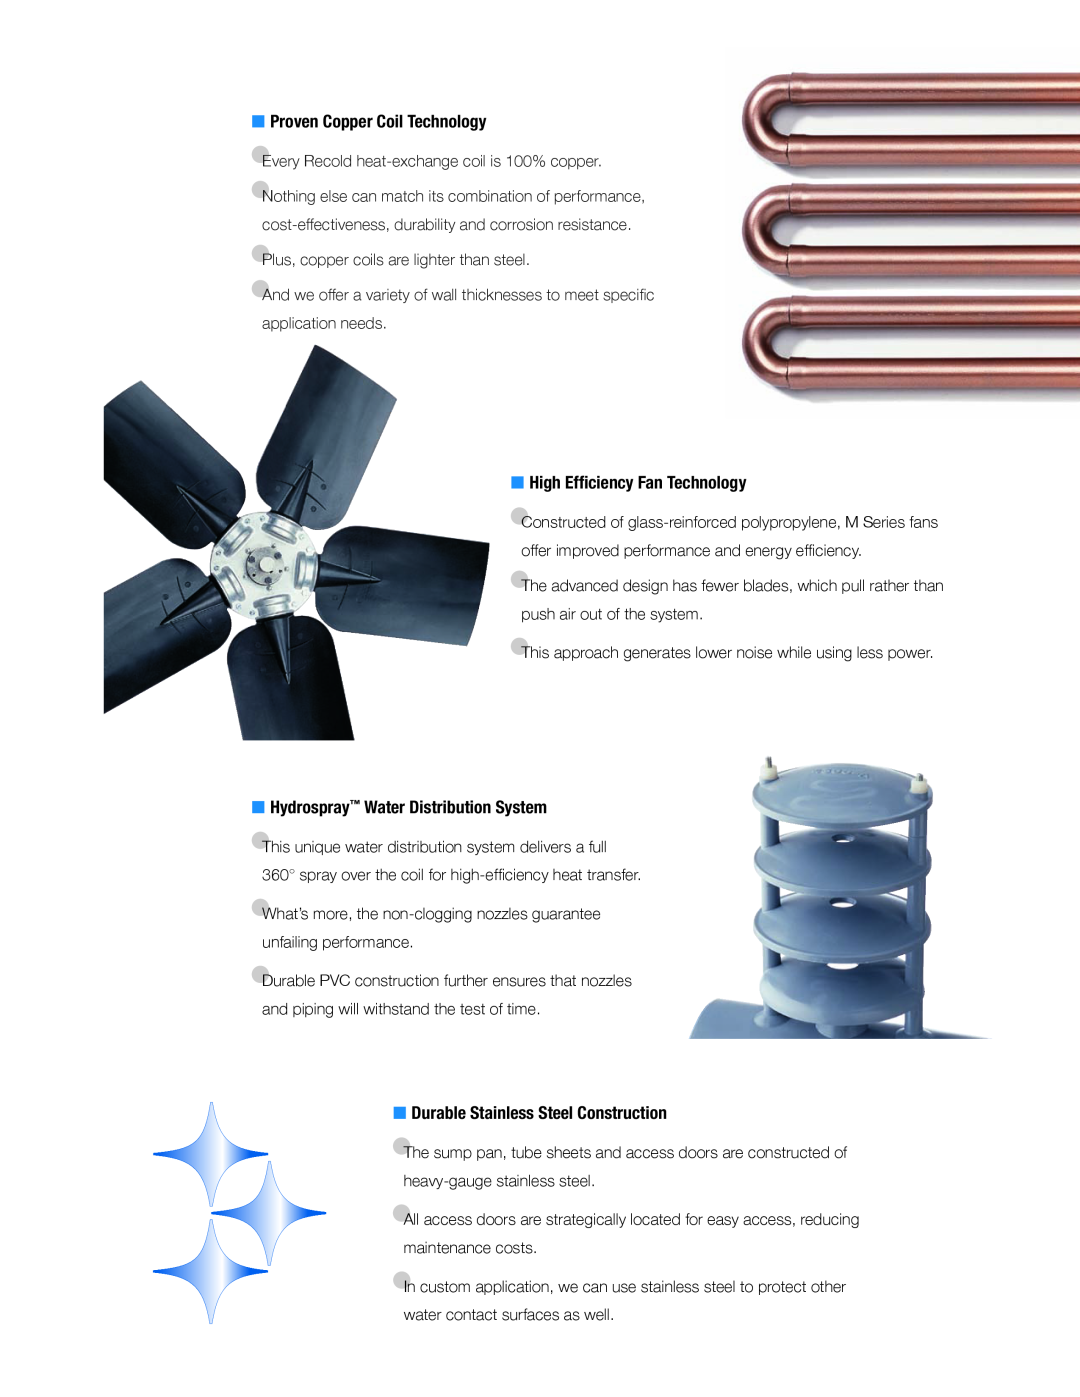 SPX Cooling Technologies Recold M manual Proven Copper Coil Technology, High Efficiency Fan Technology 